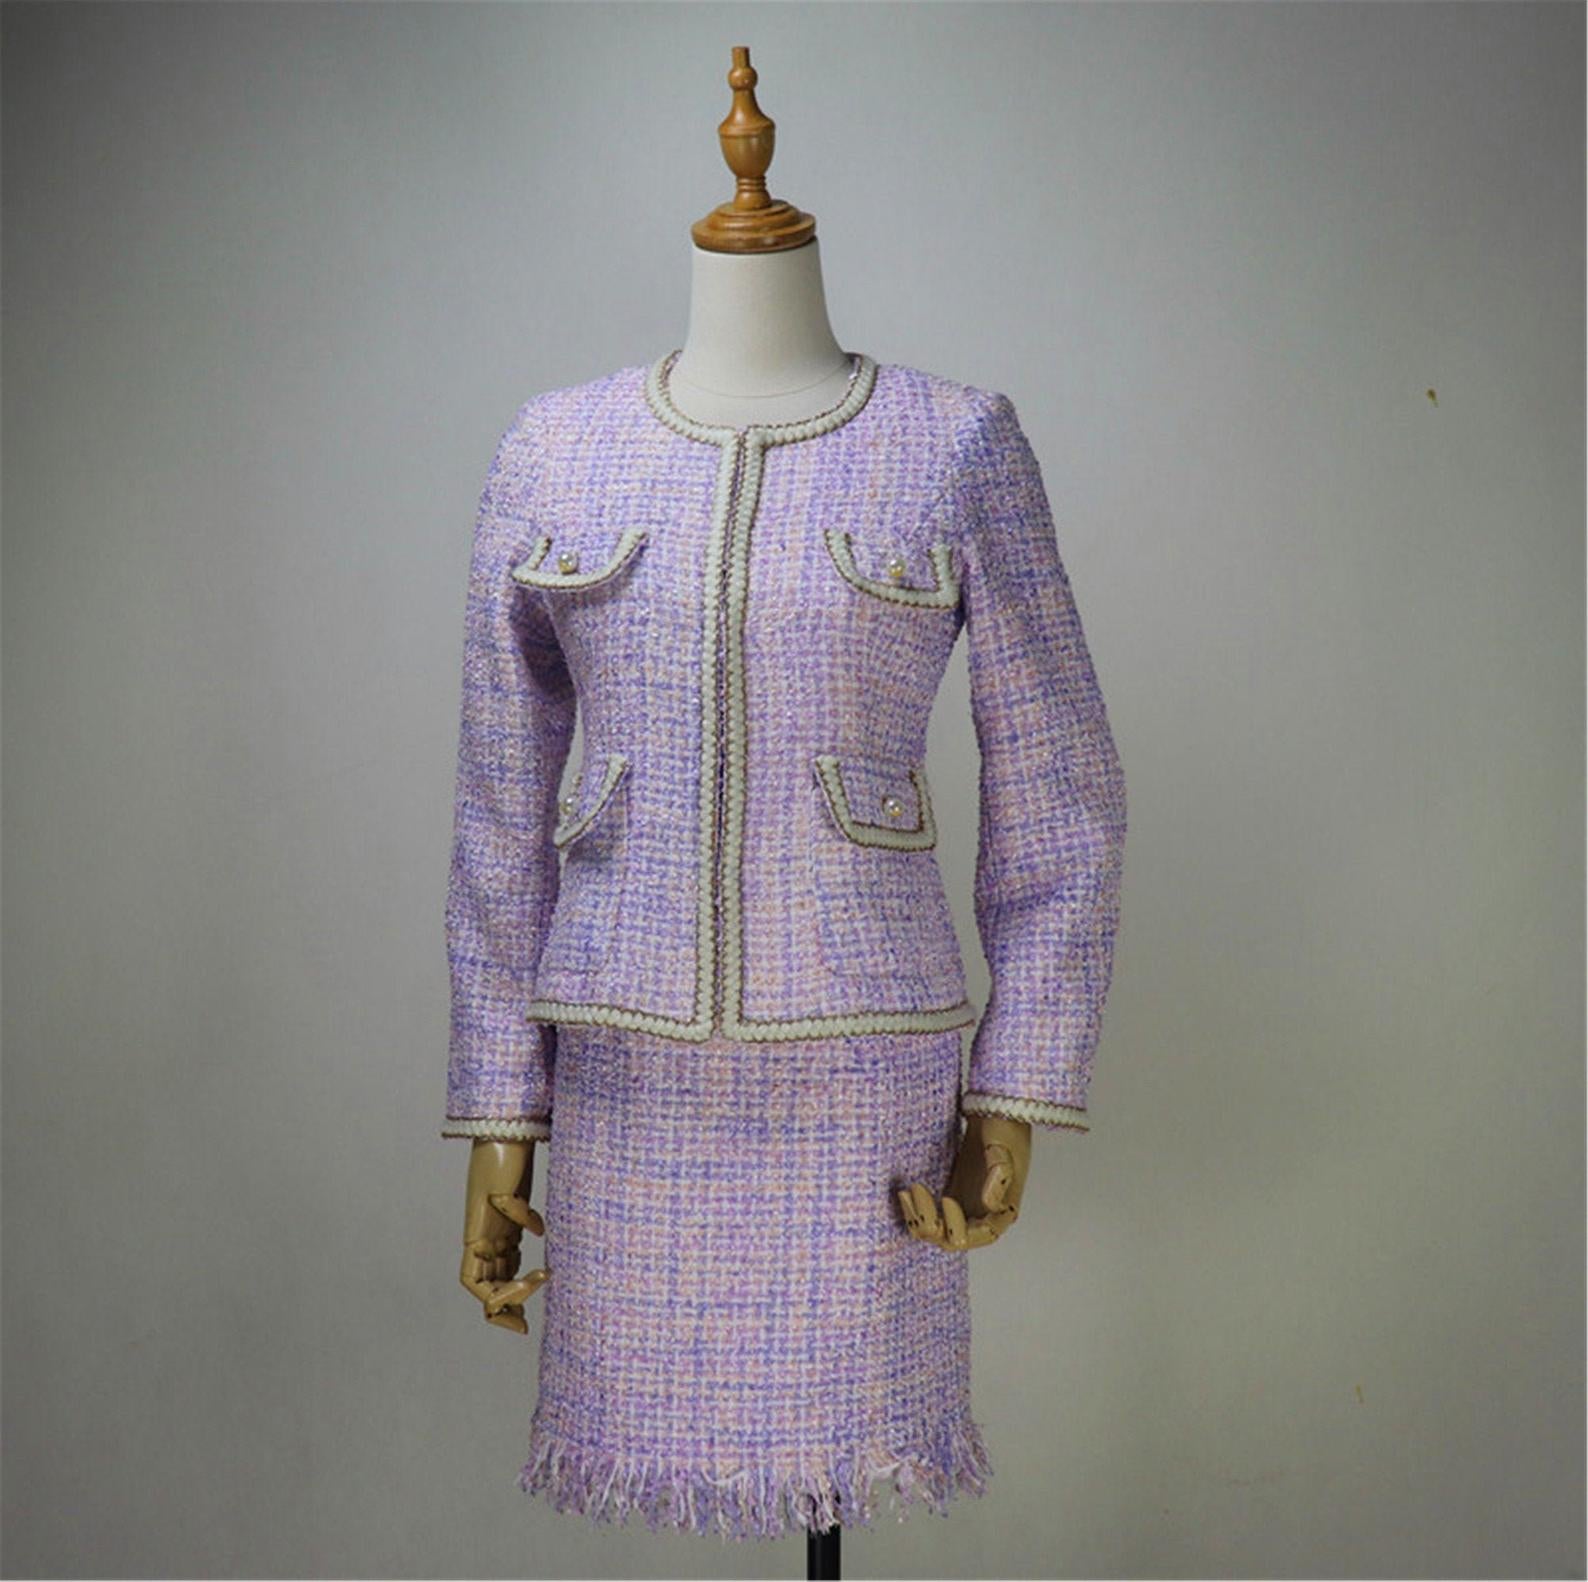 Custom Made Purple Tweed Blazer + Dress SuitWomen's Designer Inspired Purple Tweed Blazer Suit UK CUSTOMER SERVICE! Women's Designer Inspired Purple Tweed Blazer Suit - Breathe feminine flair into your wardrobe with this purple coloured round-neck blouse, pearl button with four pockets. It's crafted from light, look like diamond textured fabric. Suitable for day or night, it can be tucked into a pencil skirt with tassel. As per customer requirement our tailor will stitch the suit accordingly.